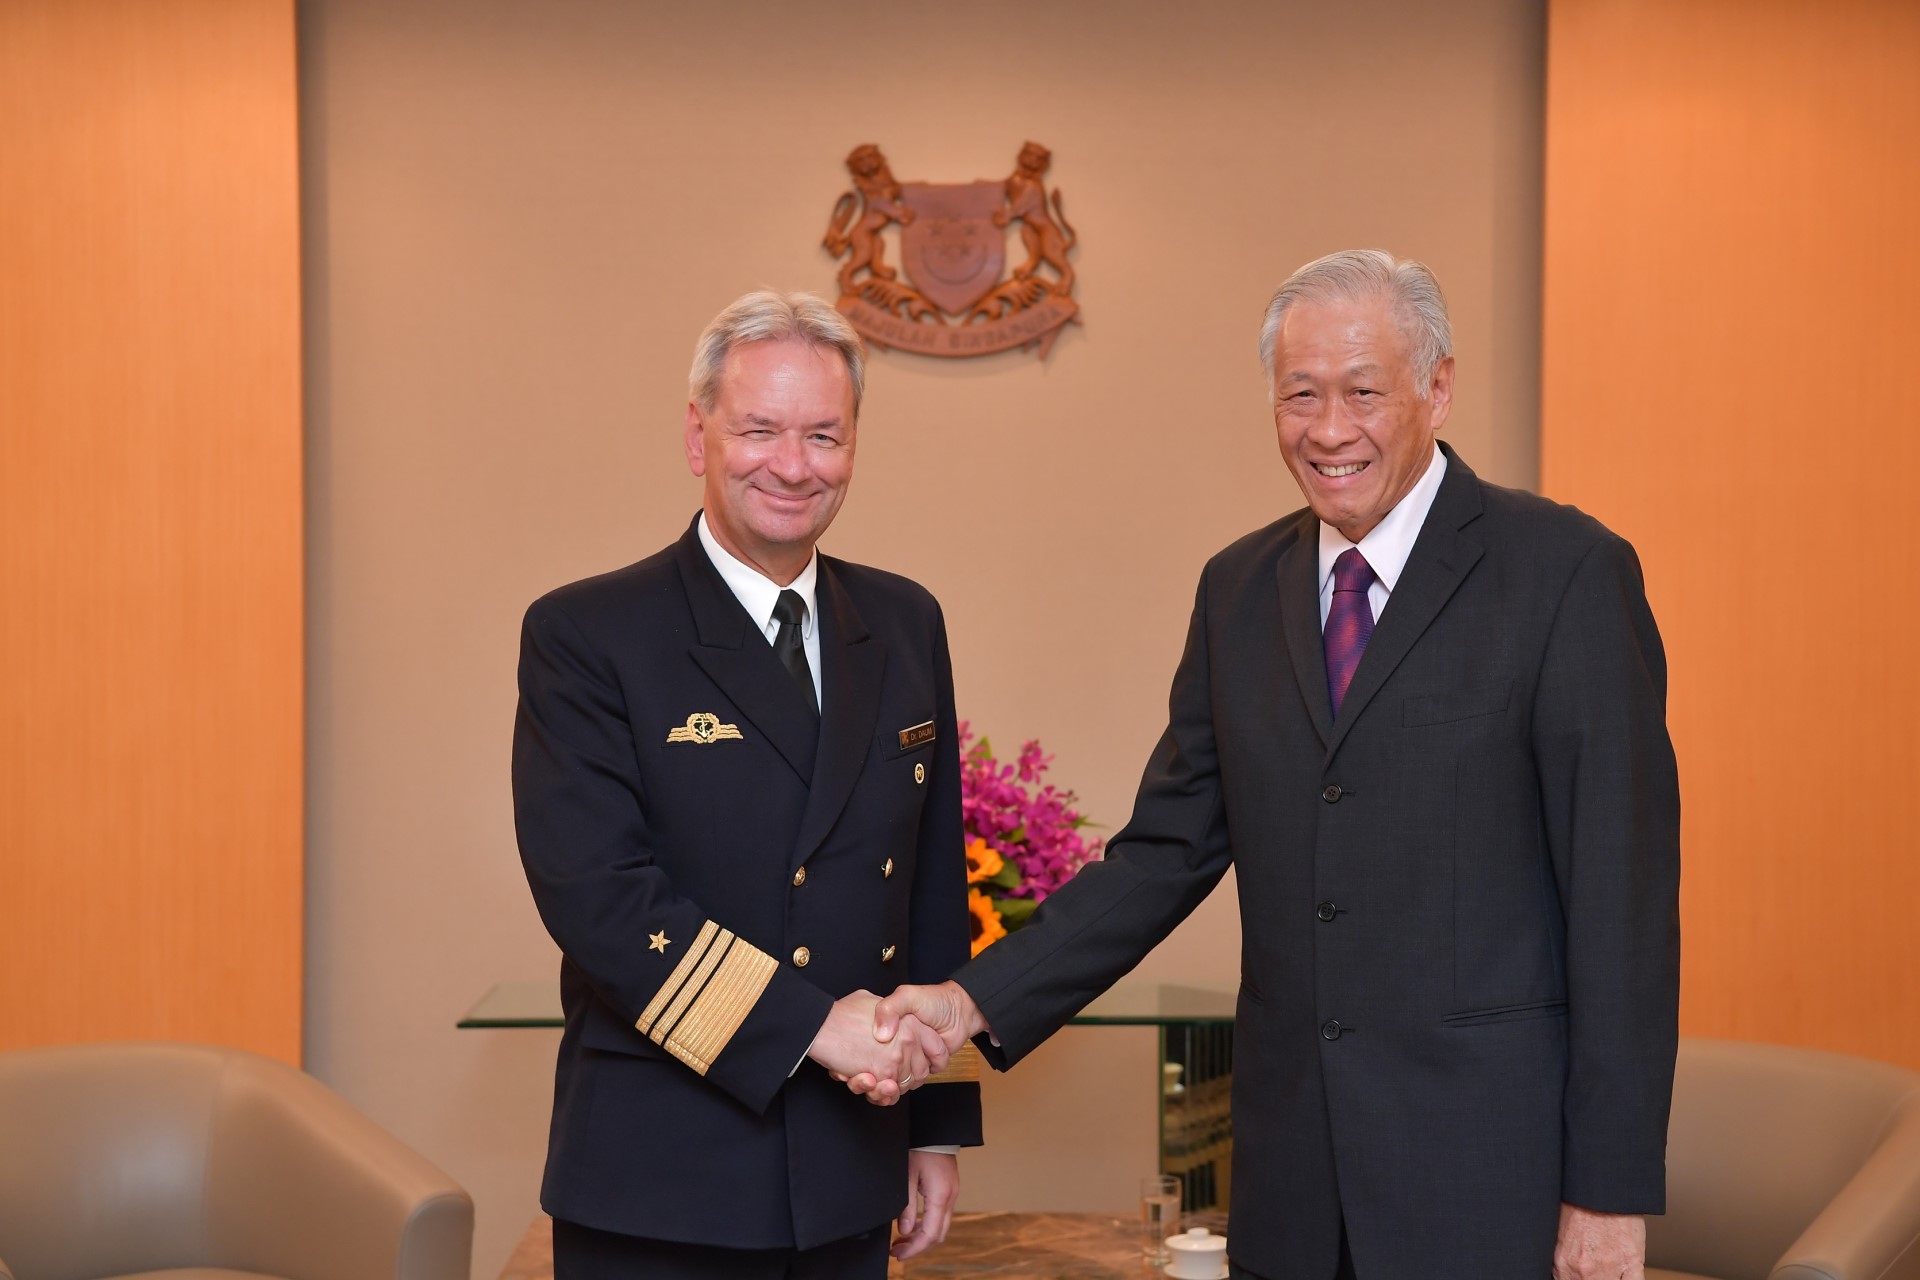 The German Chief of Cyber and Information Domain Service (CIDS) Vice Admiral (VADM) Dr. Thomas Daum calling on Minister for Defence Dr Ng Eng Hen at the Ministry of Defence (MINDEF) this afternoon.